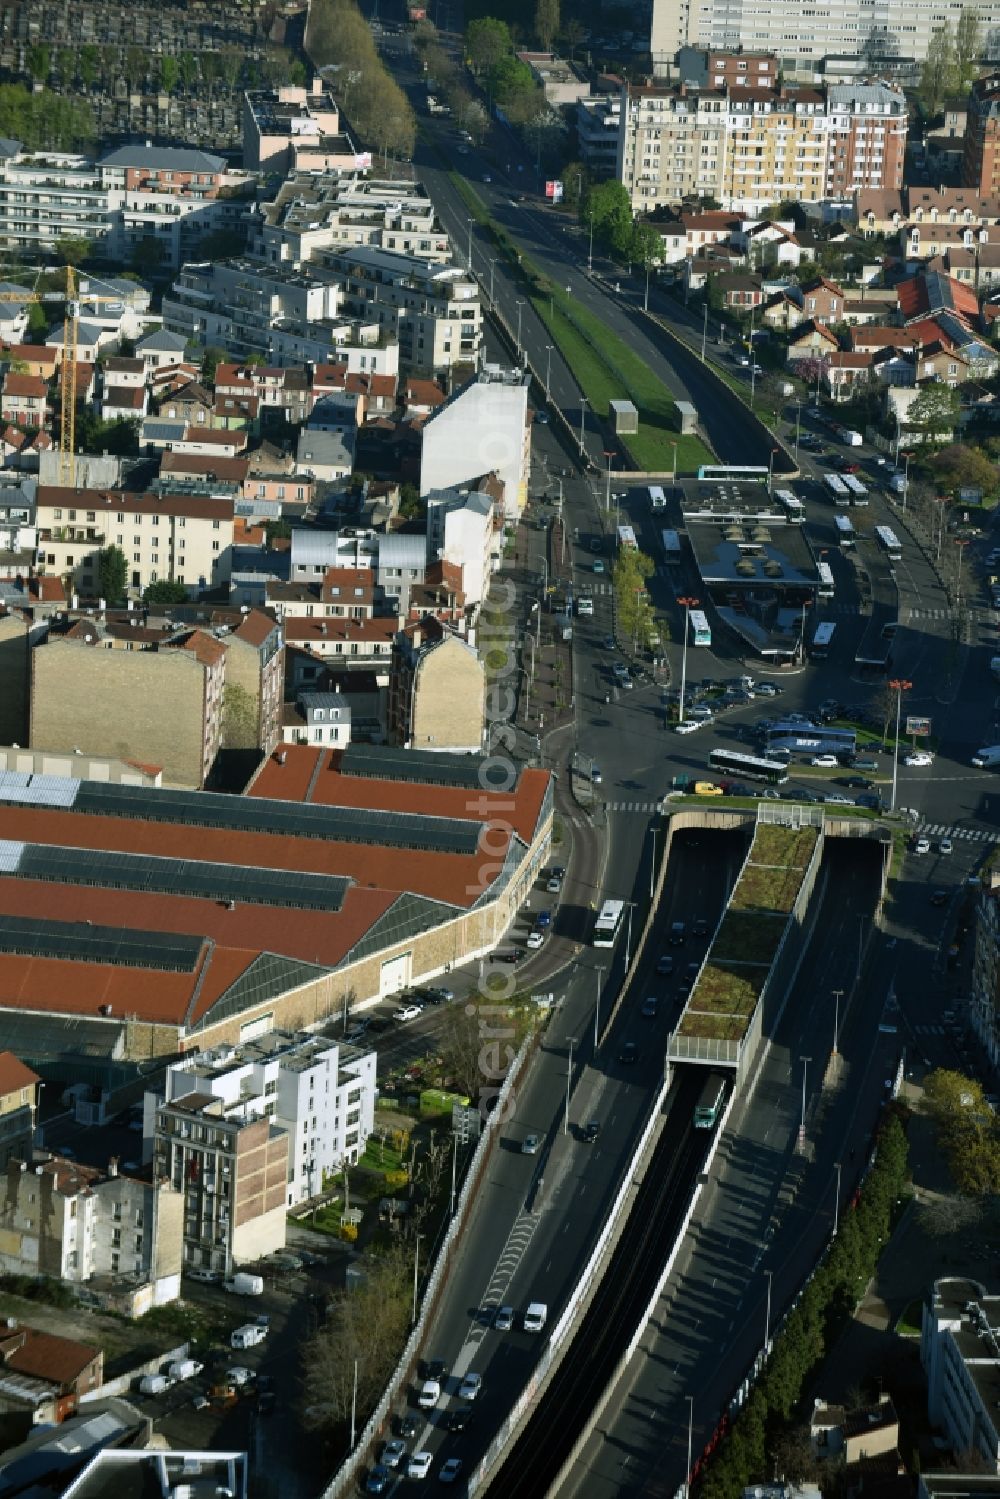 Aerial image Paris - Station building and track systems of Metro subway station Gabriel Peri Asnieres Gennevilliers in Paris in Ile-de-France, France